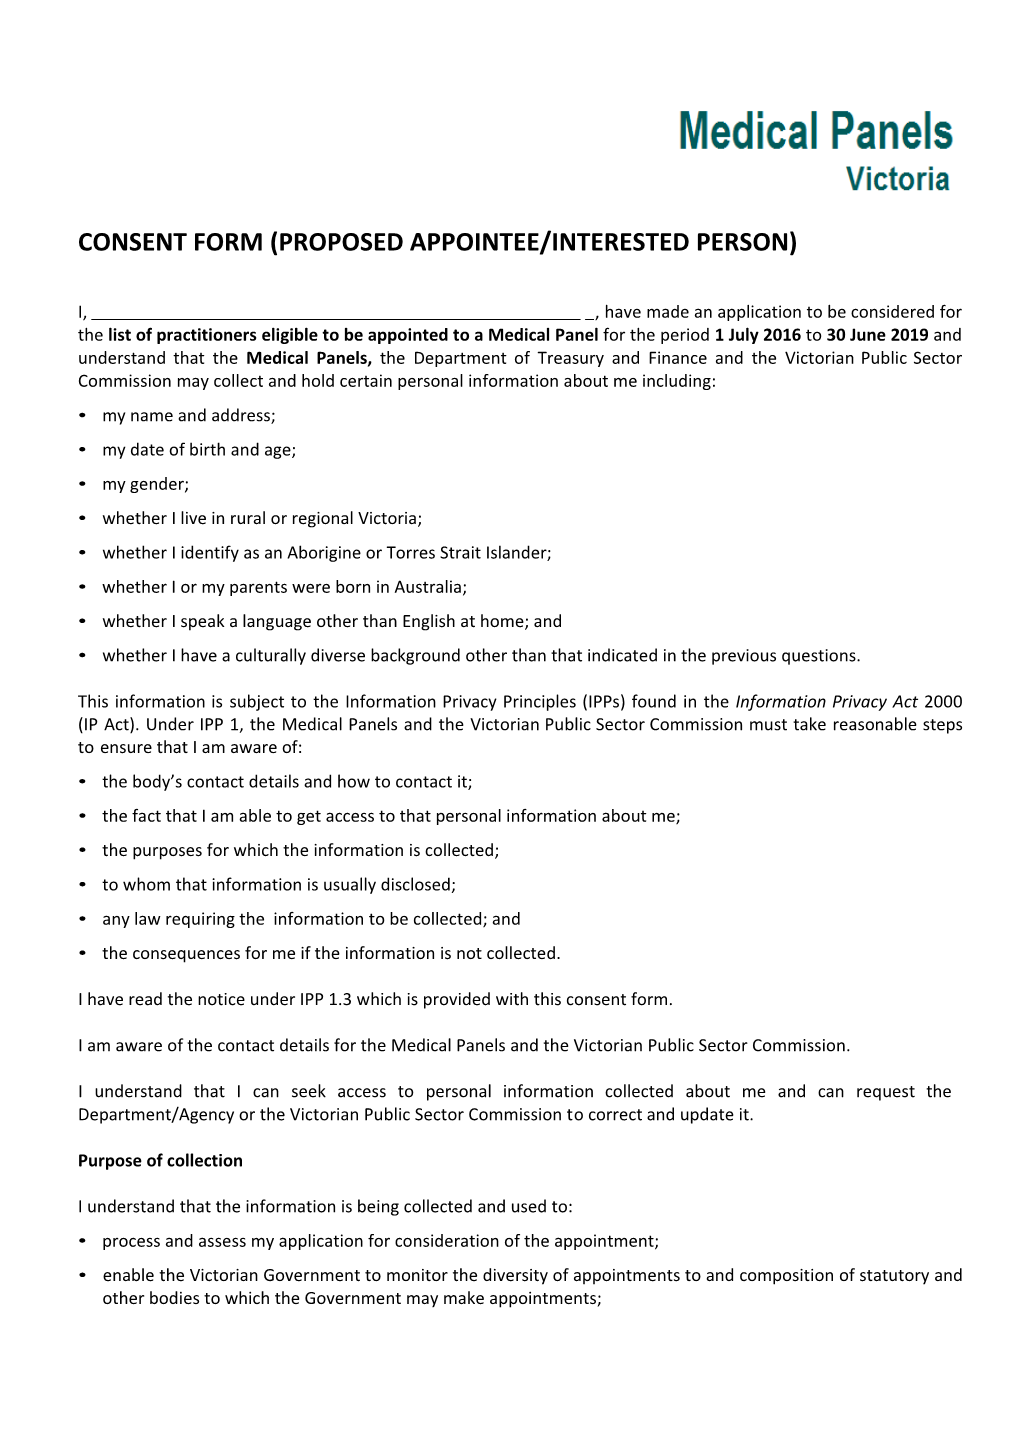 Consent Form (Proposed Appointee/Interested Person)